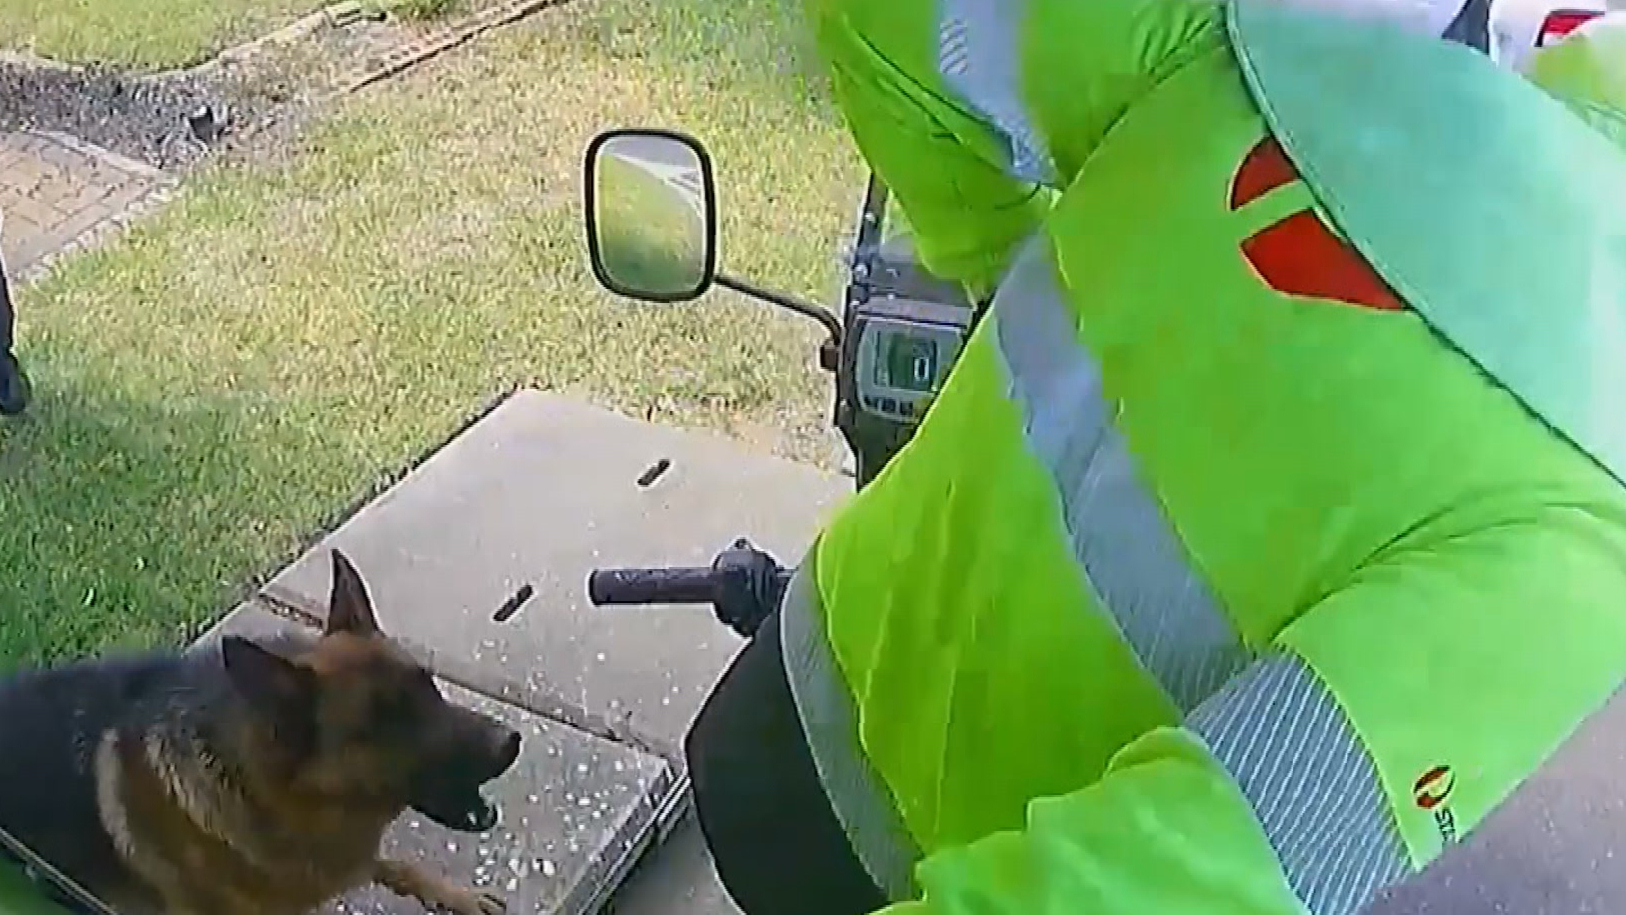 Worst state for dog attacks on posties revealed